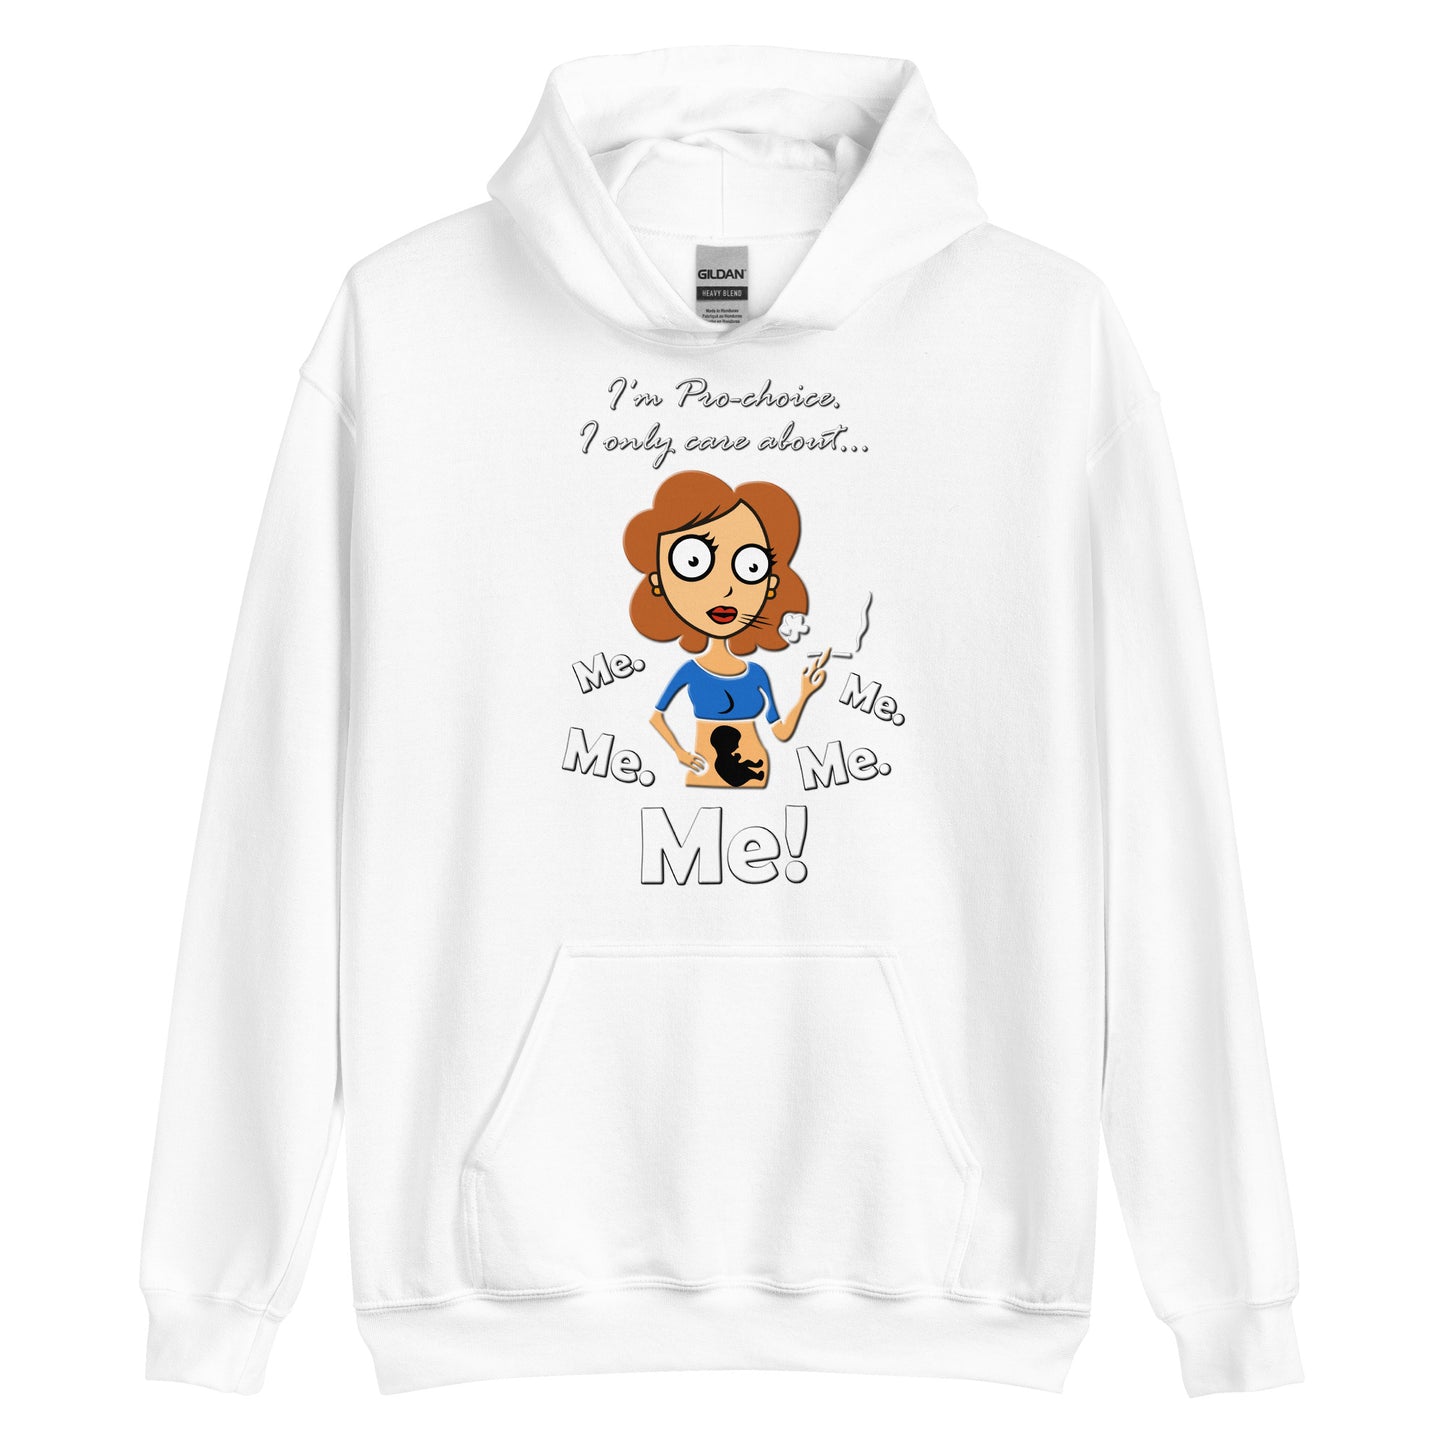 A015 Hoodie – Gildan 18500 Unisex Hoodie Featuring a Graphic of a Young Pregnant Woman Smoking, with the Text “I’m Pro-choice. I Only Care About Me. Me. Me. Me. Me!”